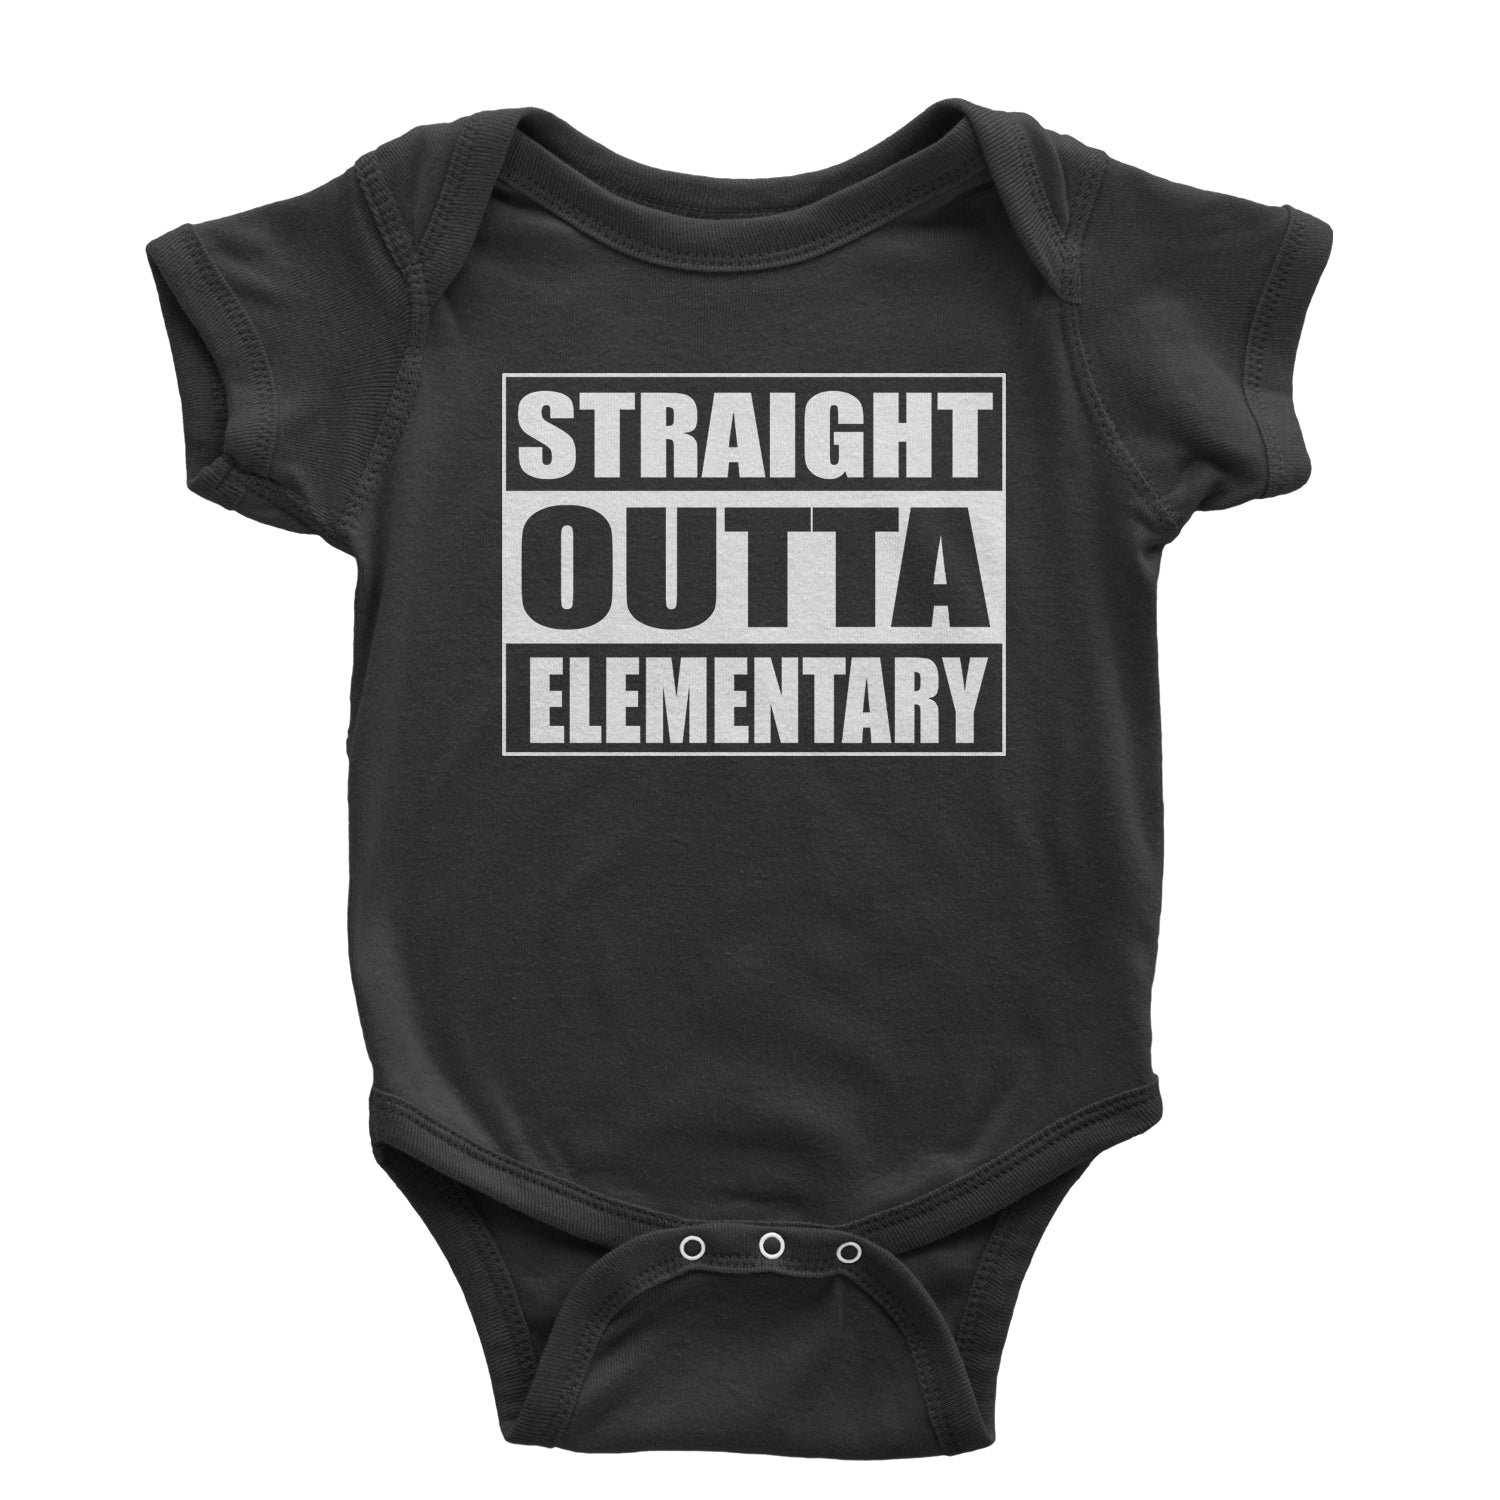 Straight Outta Elementary Infant One-Piece Romper Bodysuit 2020, 2021, 2022, class, of, quarantine, queen by Expression Tees